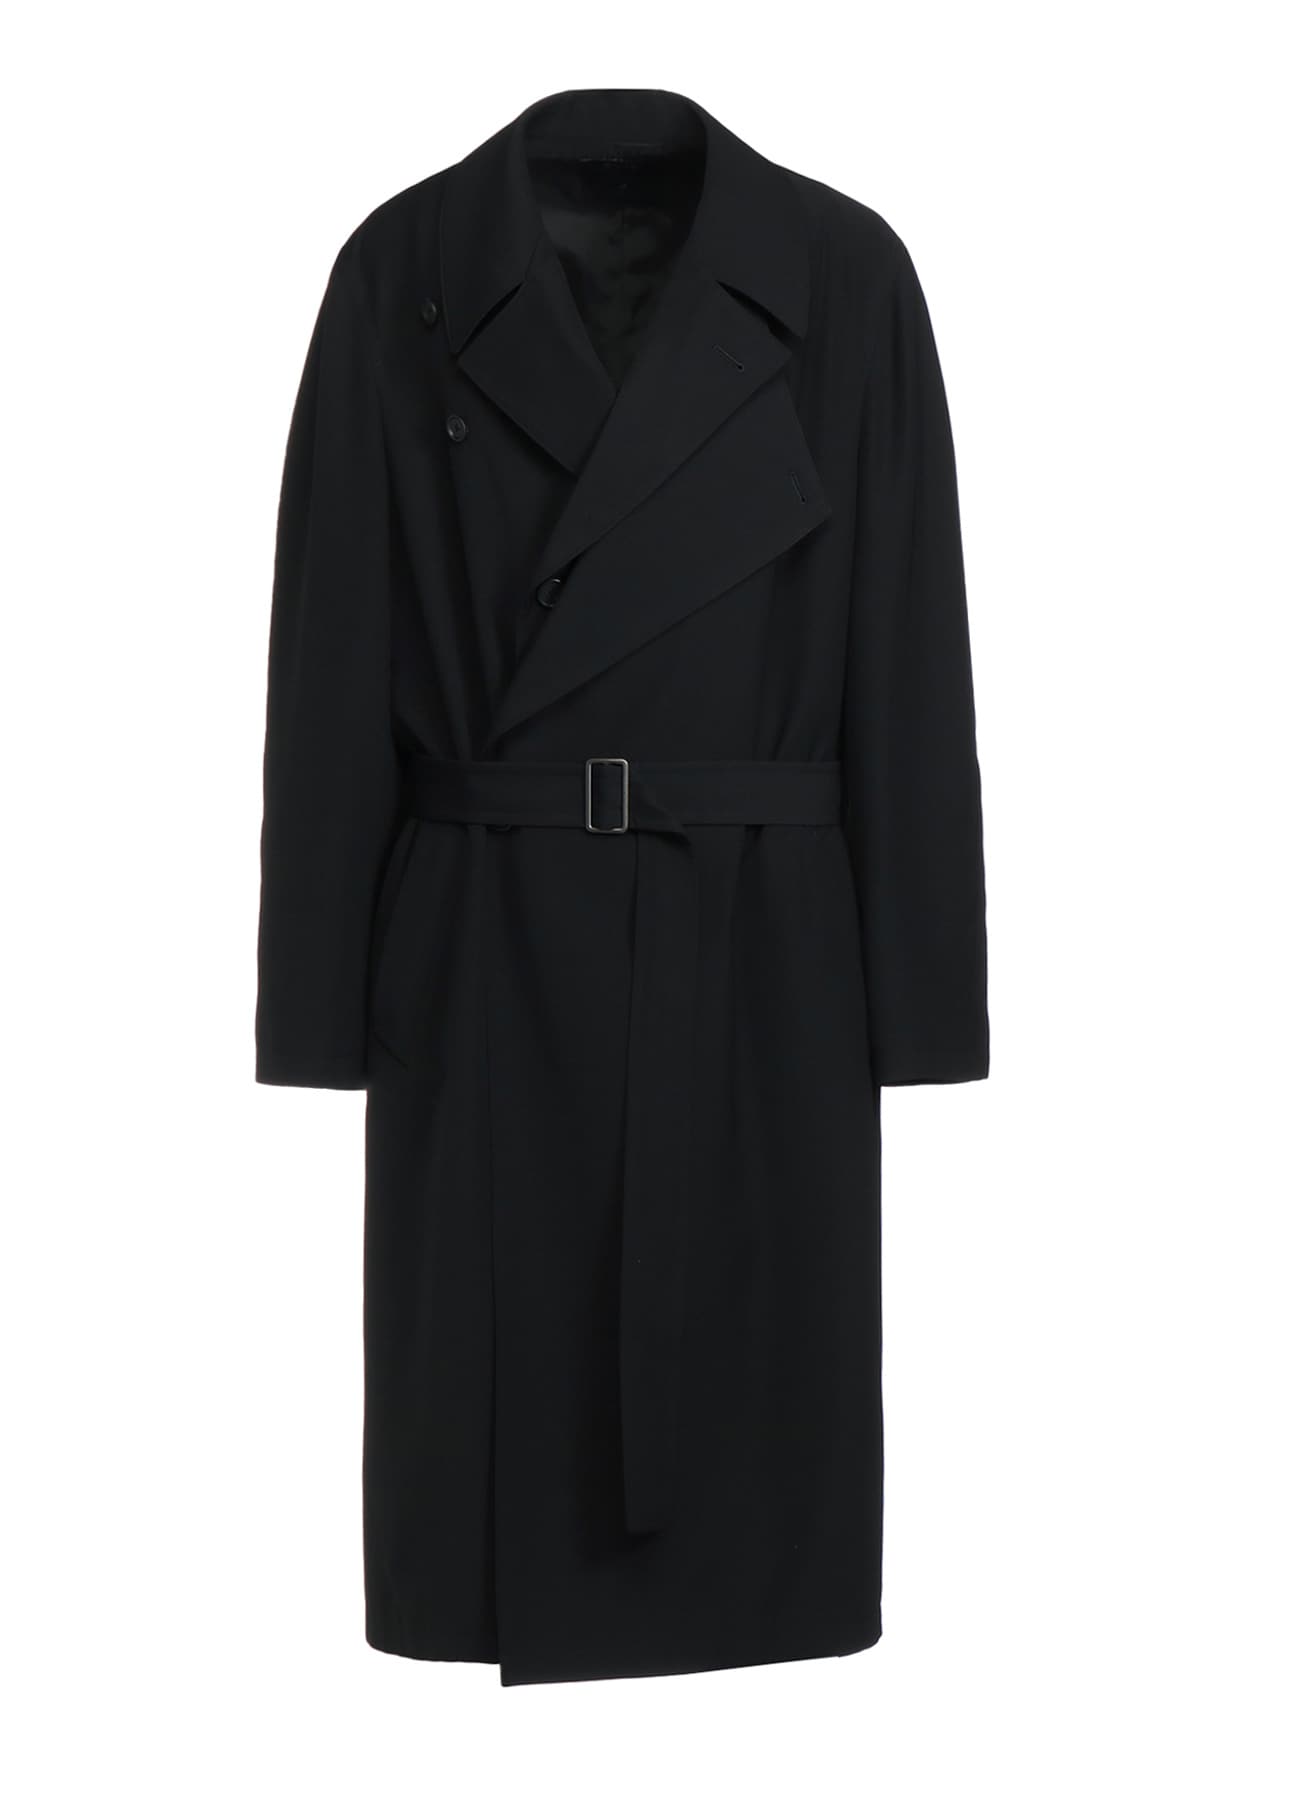 POLYESTER GABARDINE DOUBLE-BREASTED COAT WITH DOUBLE-TAILORED LEFT FRONT